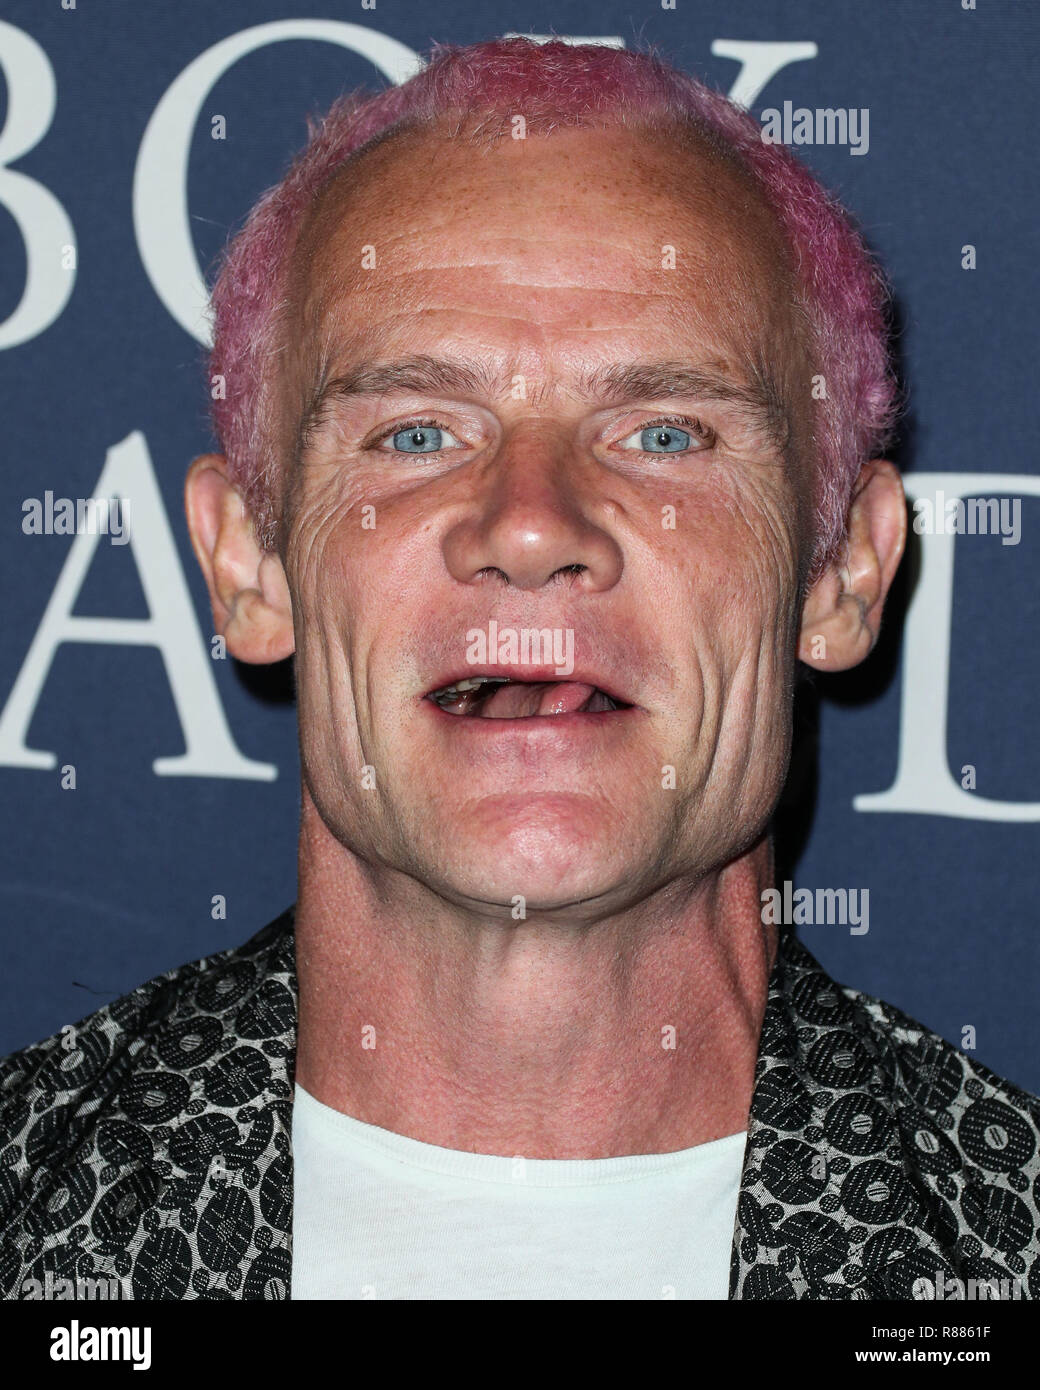 LOS ANGELES, CA, USA - OCTOBER 29: Flea, Michael Peter Balzary at the Los Angeles Premiere Of Focus Features' 'Boy Erased' held at the Directors Guild Of America Theater on October 29, 2018 in Los Angeles, California, United States. (Photo by Xavier Collin/Image Press Agency) Stock Photo